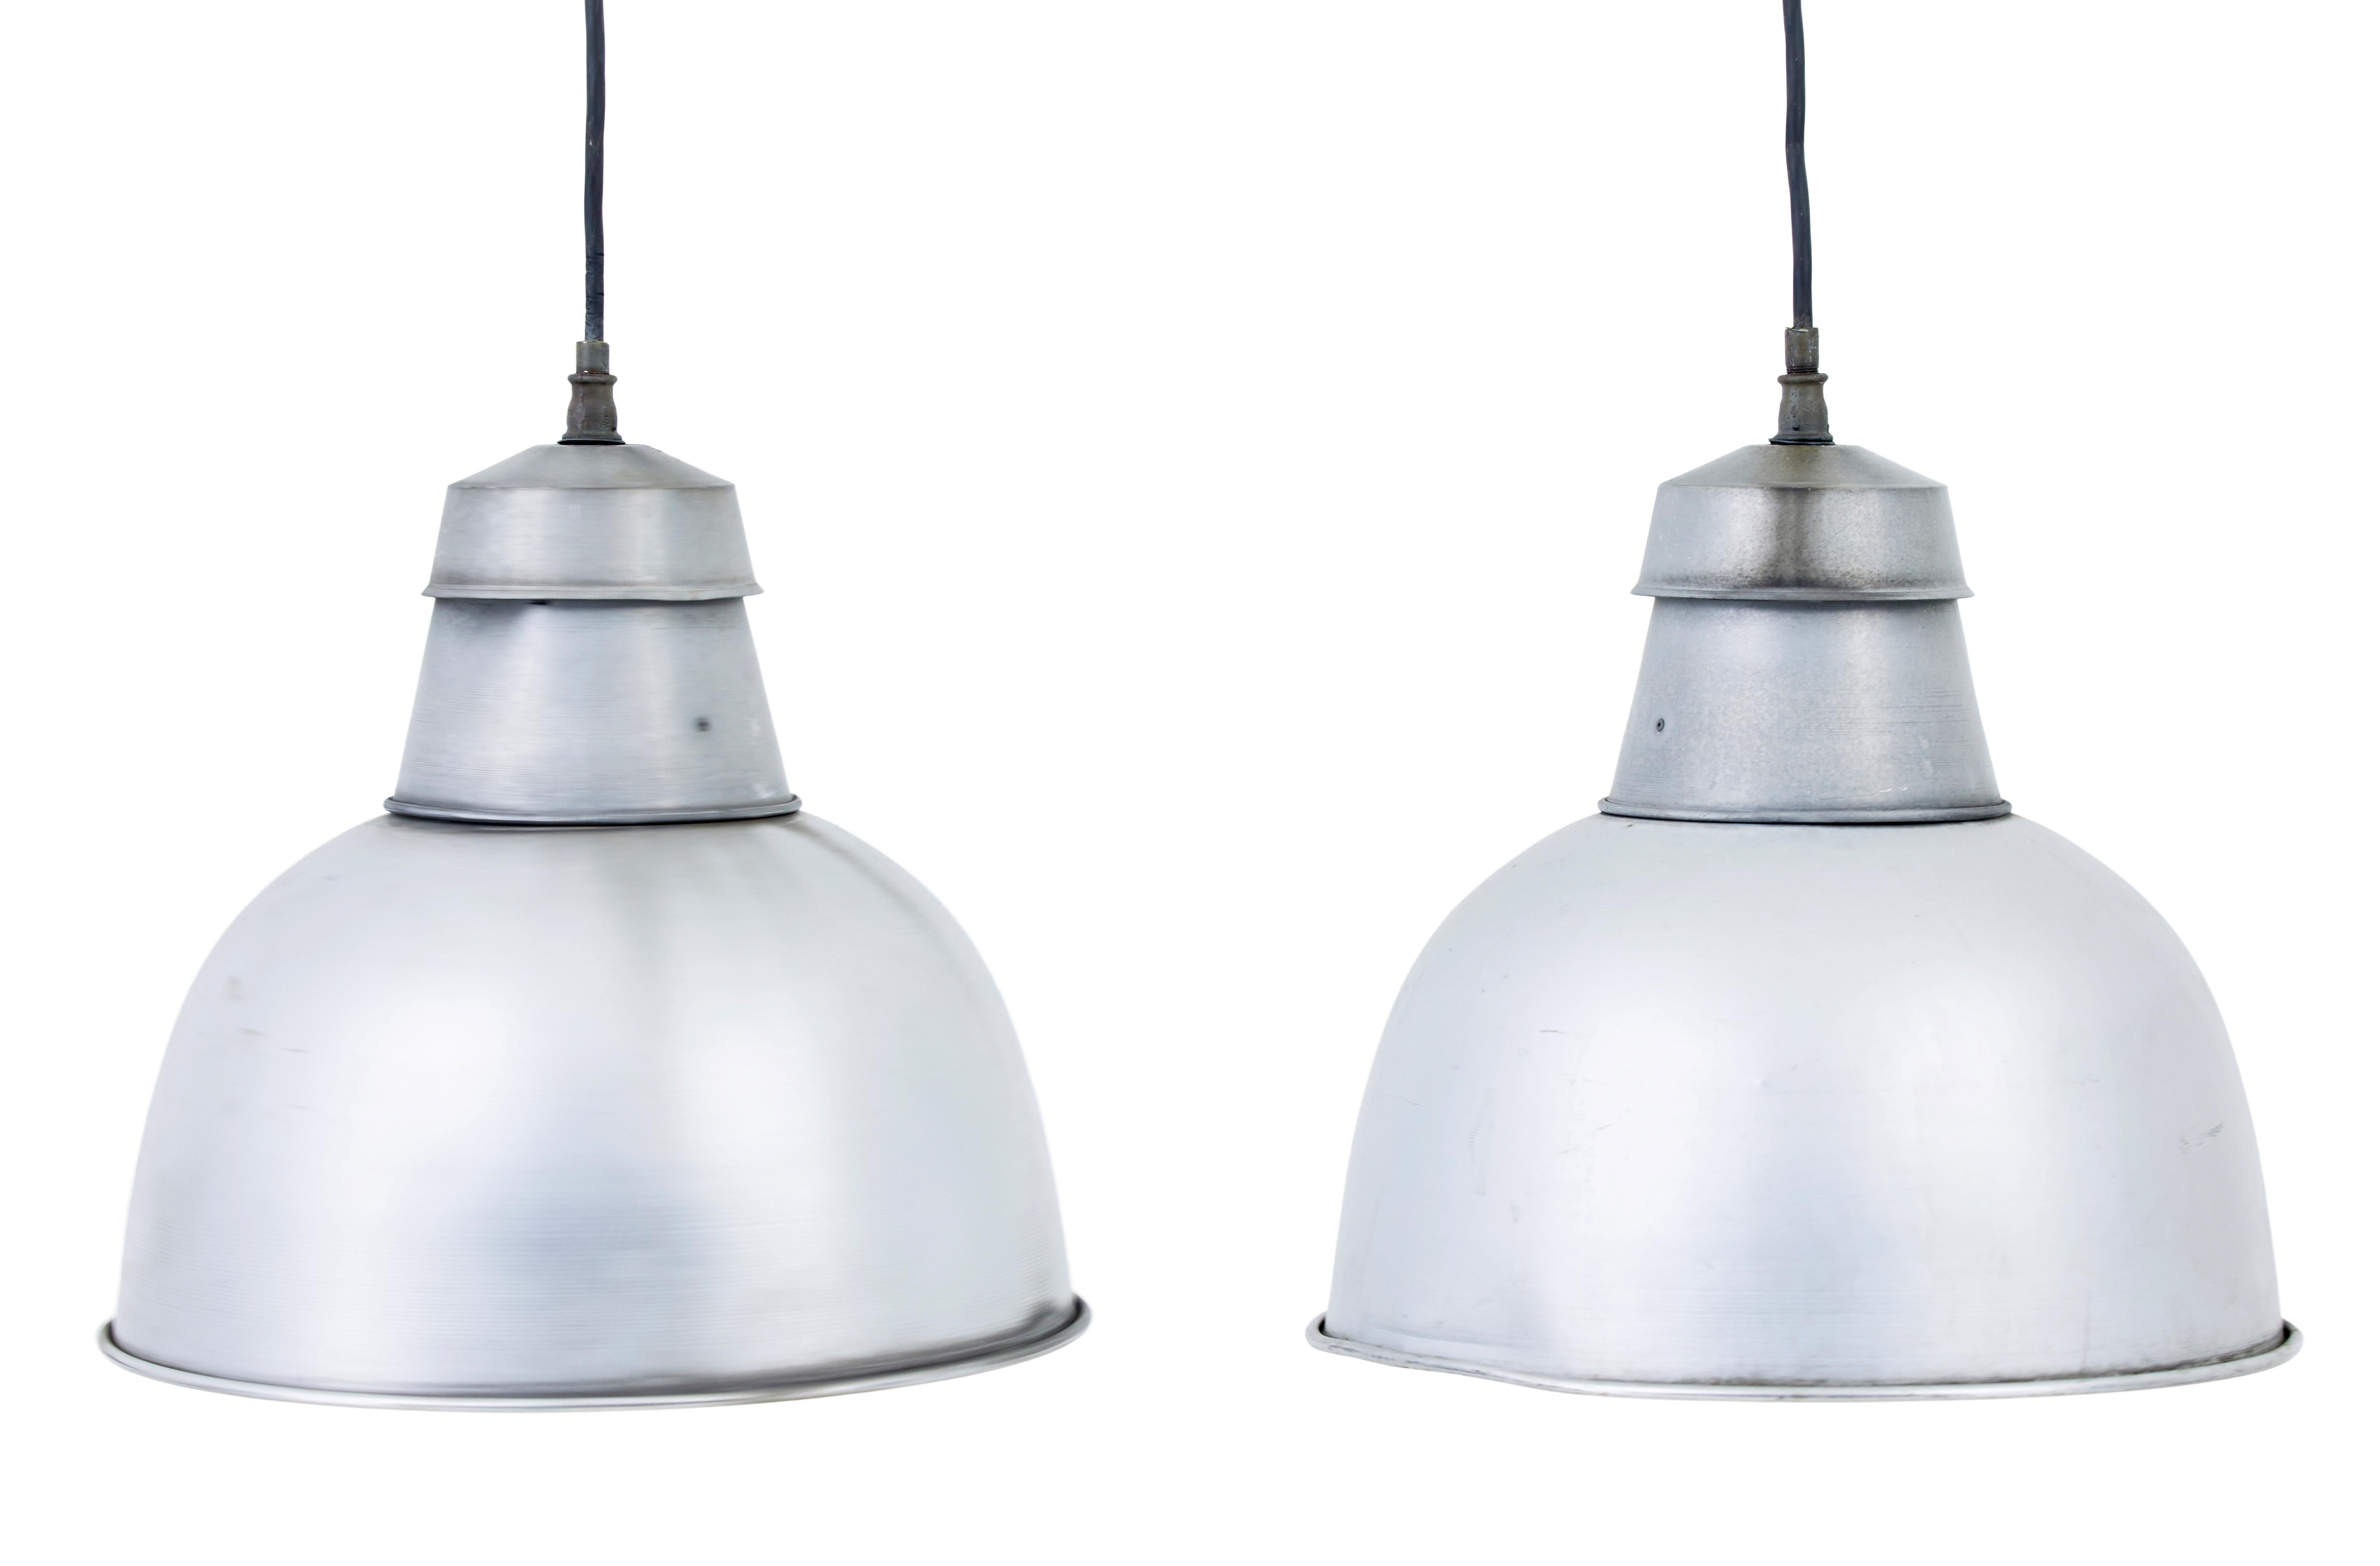 Pair of 1920’s industrial metal hanging ceiling lights.

Ideal for an installation into the modern home for hanging over the dining table or hallway.

Expected marks, staining and minor dents from use which only adds to the look.

These lamps are